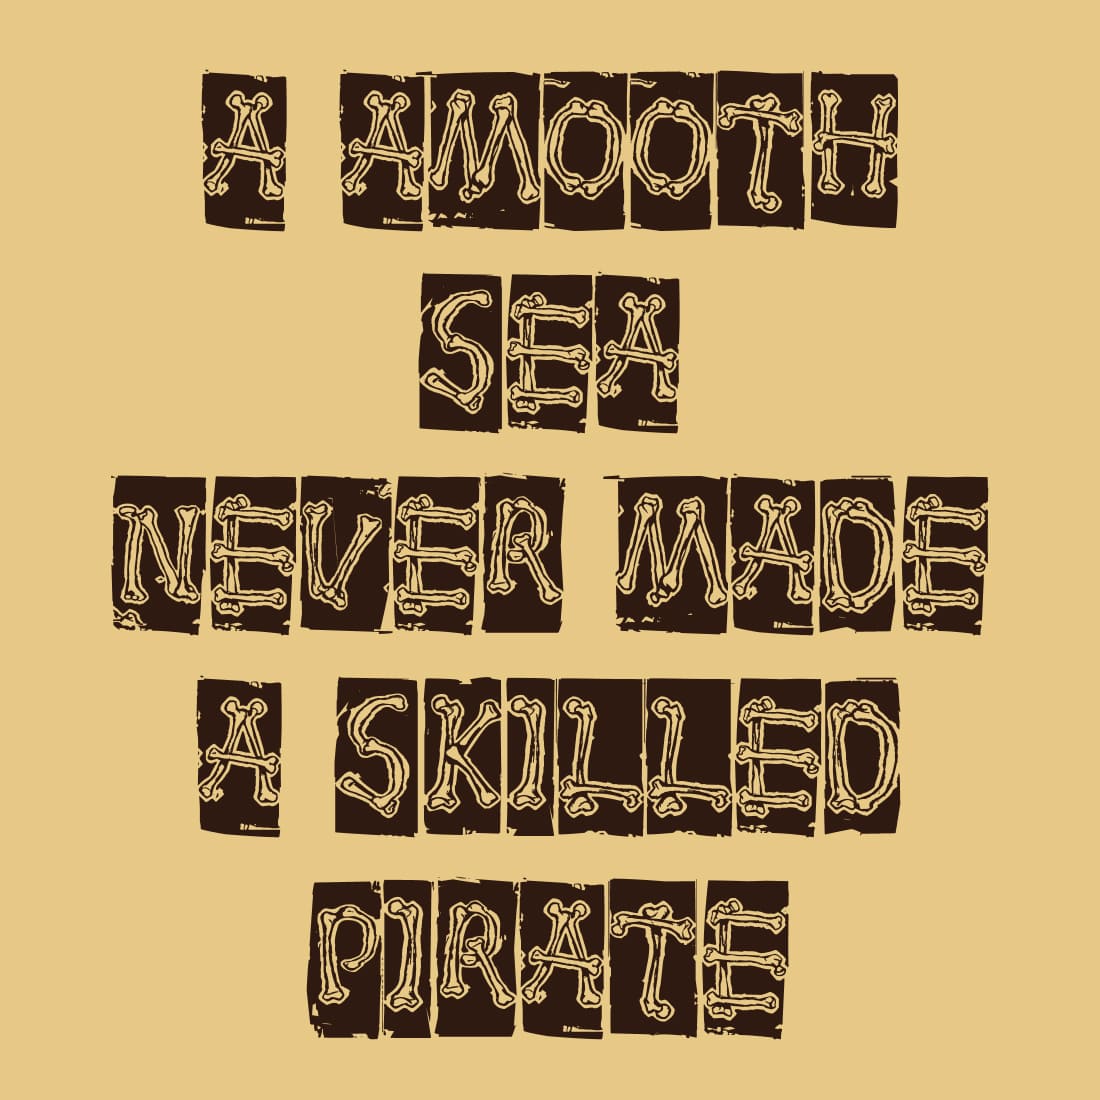 A pirate typeface that conveys atmosphere and style.